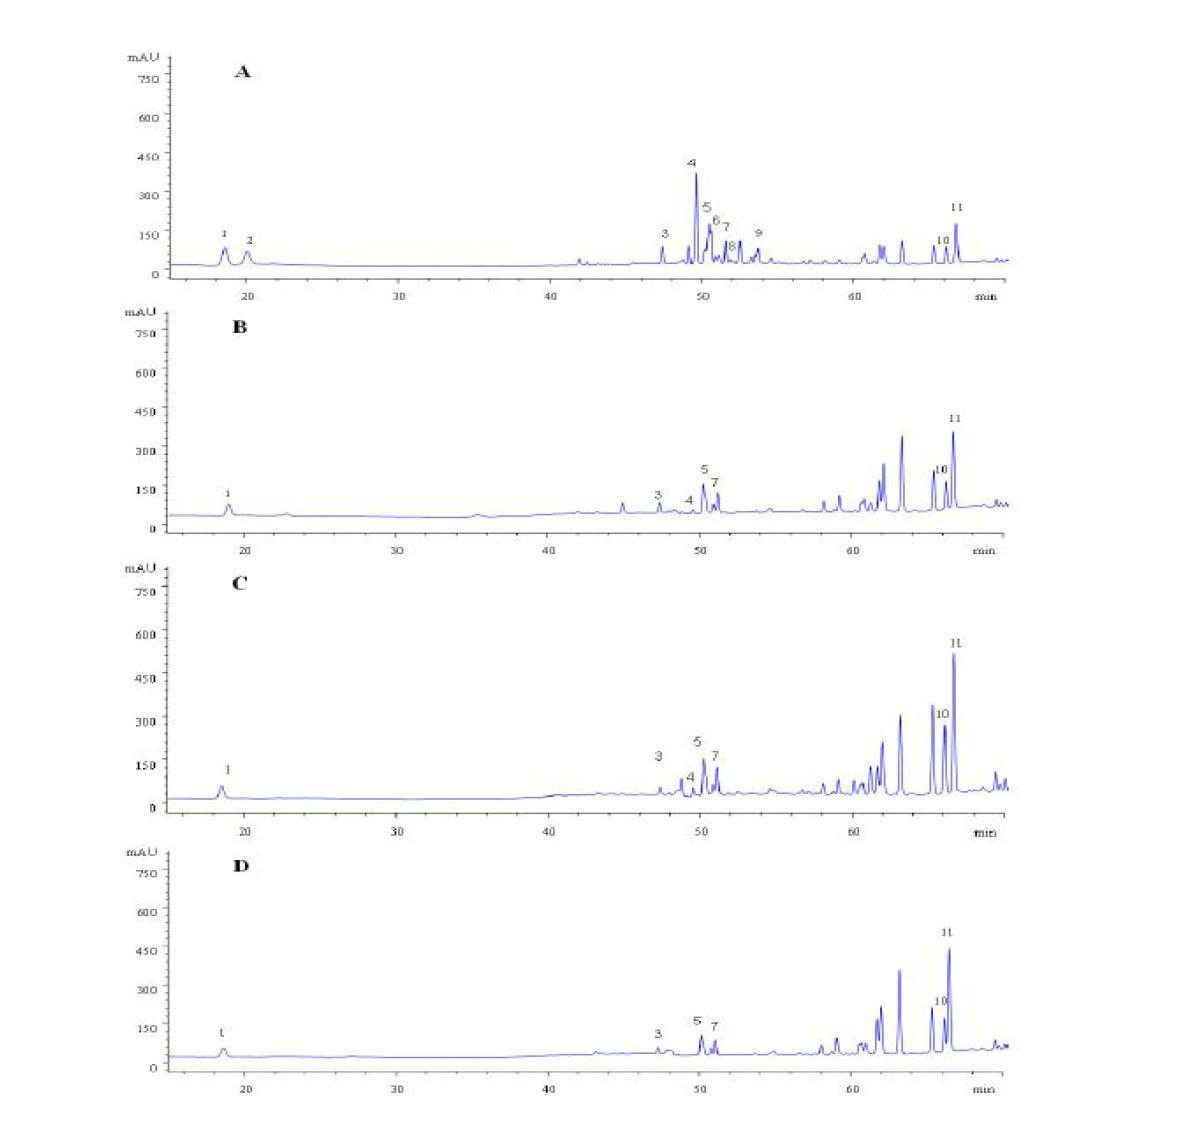 HPLC-UV chromatograms of total ginsenosides extracted from ginseng steamed 2 times at 120℃ in various times (15, 30, 45, and 60 min). Before steaming each time, ginsengs were soaked in grape juice for 24 h.